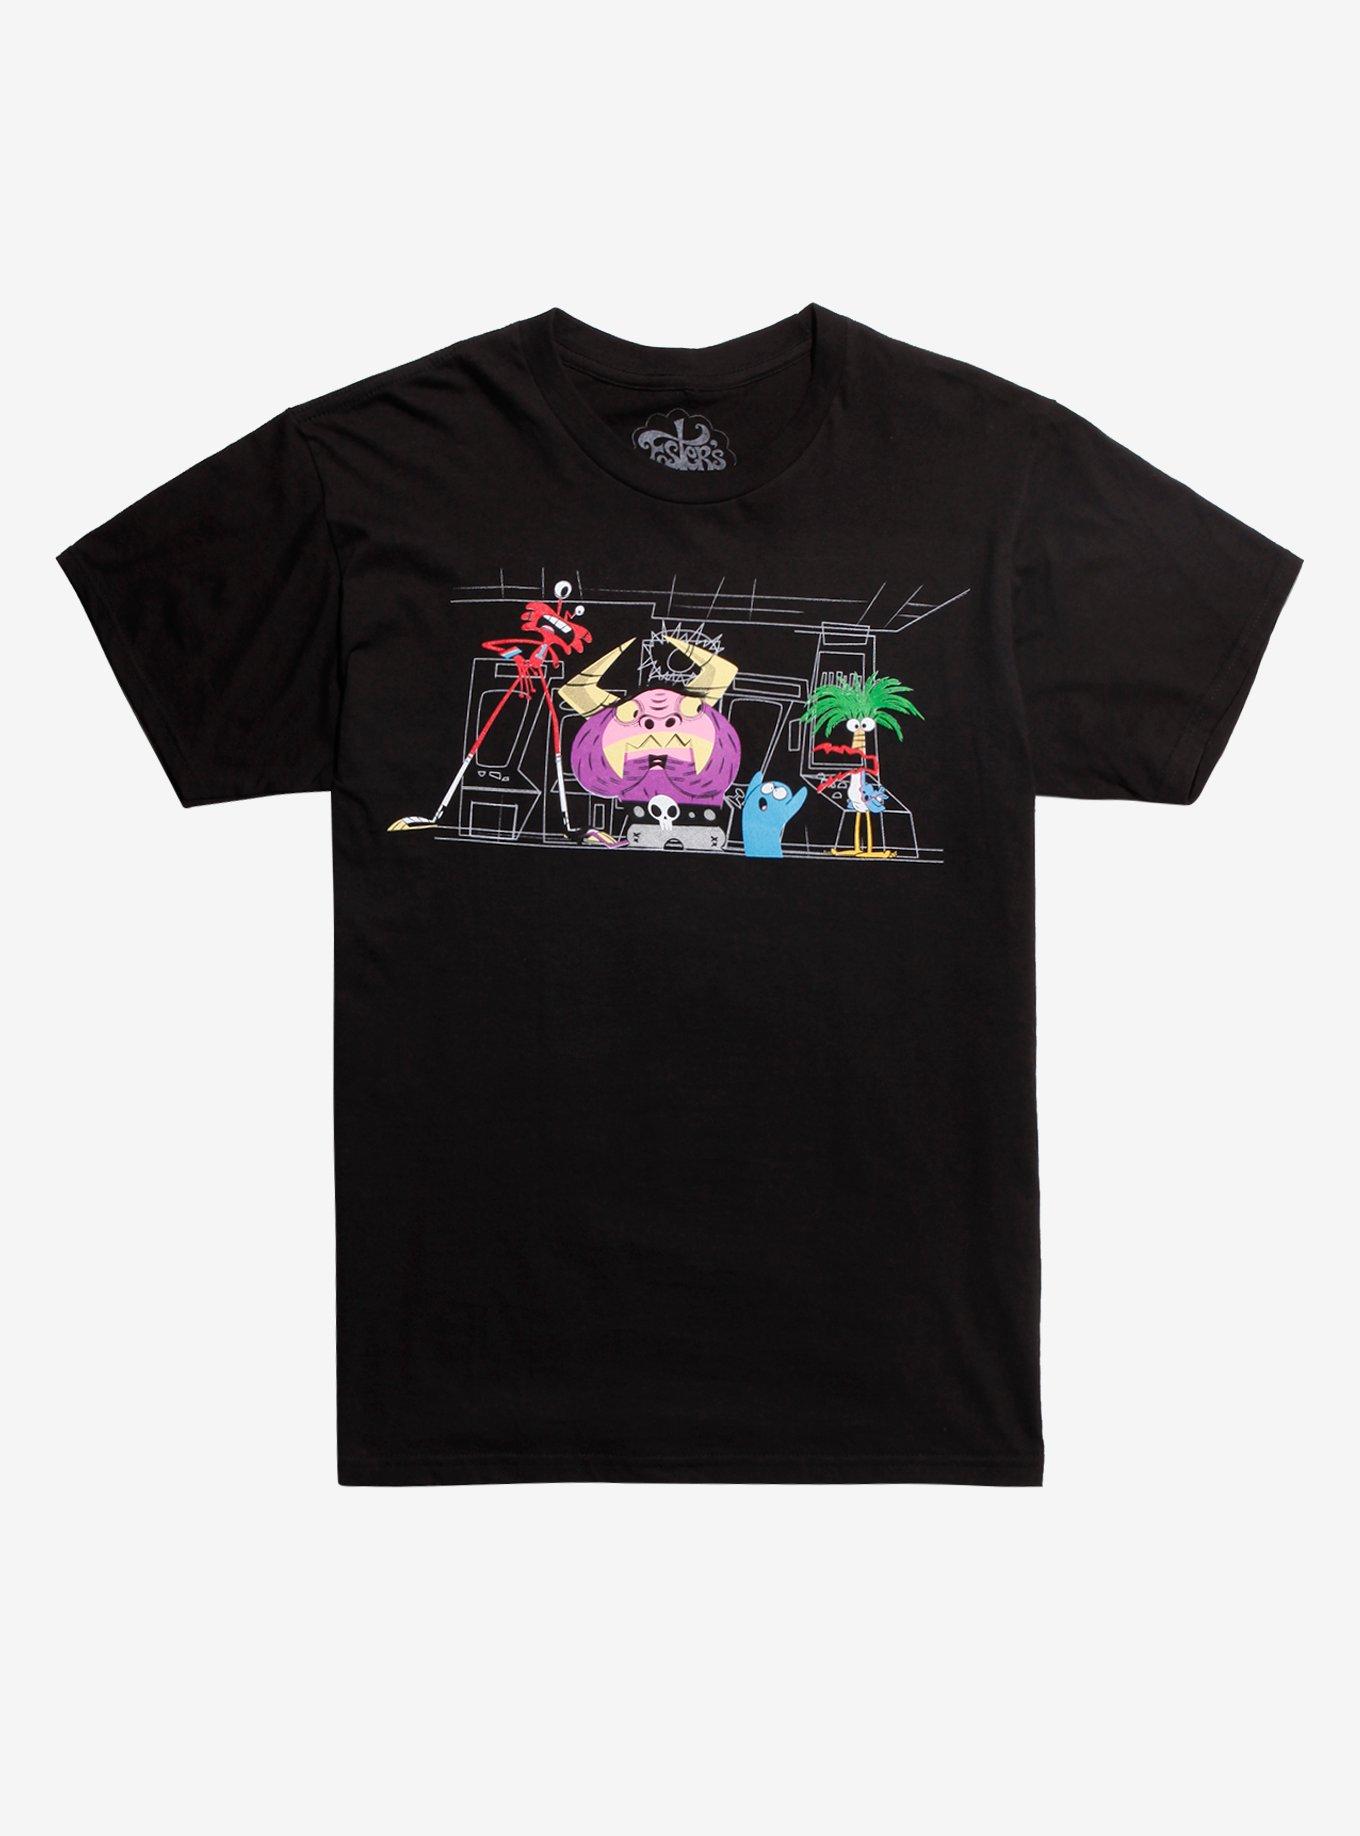 Foster's Home For Imaginary Friends Schlock Star Band T-Shirt, MULTI, hi-res